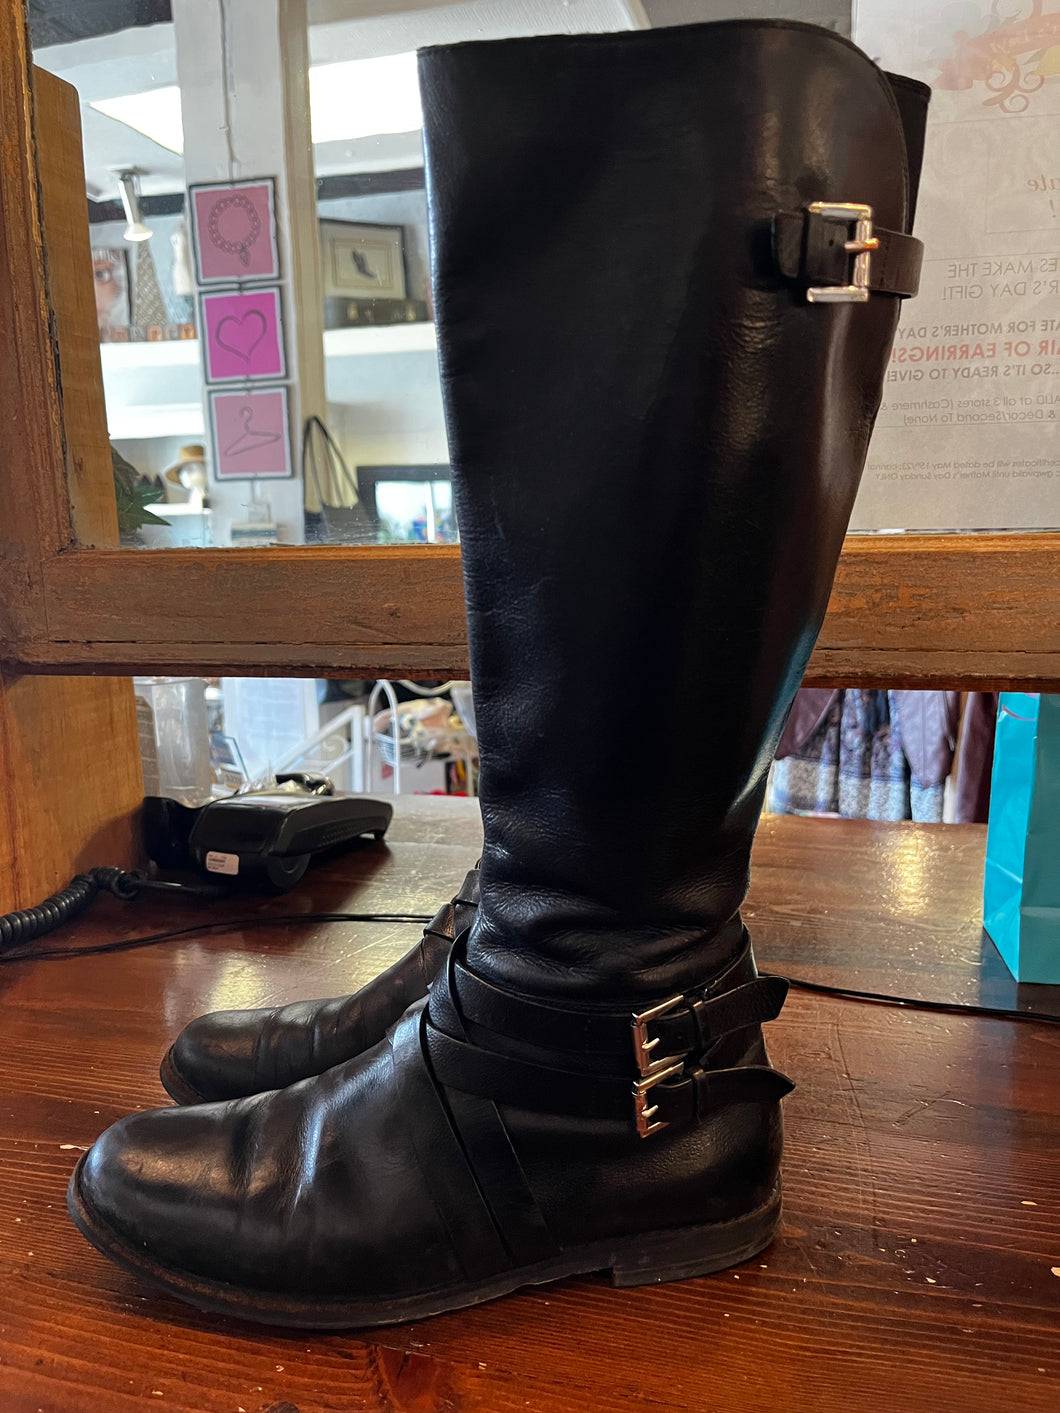 Leather Boots (Size 8.5)